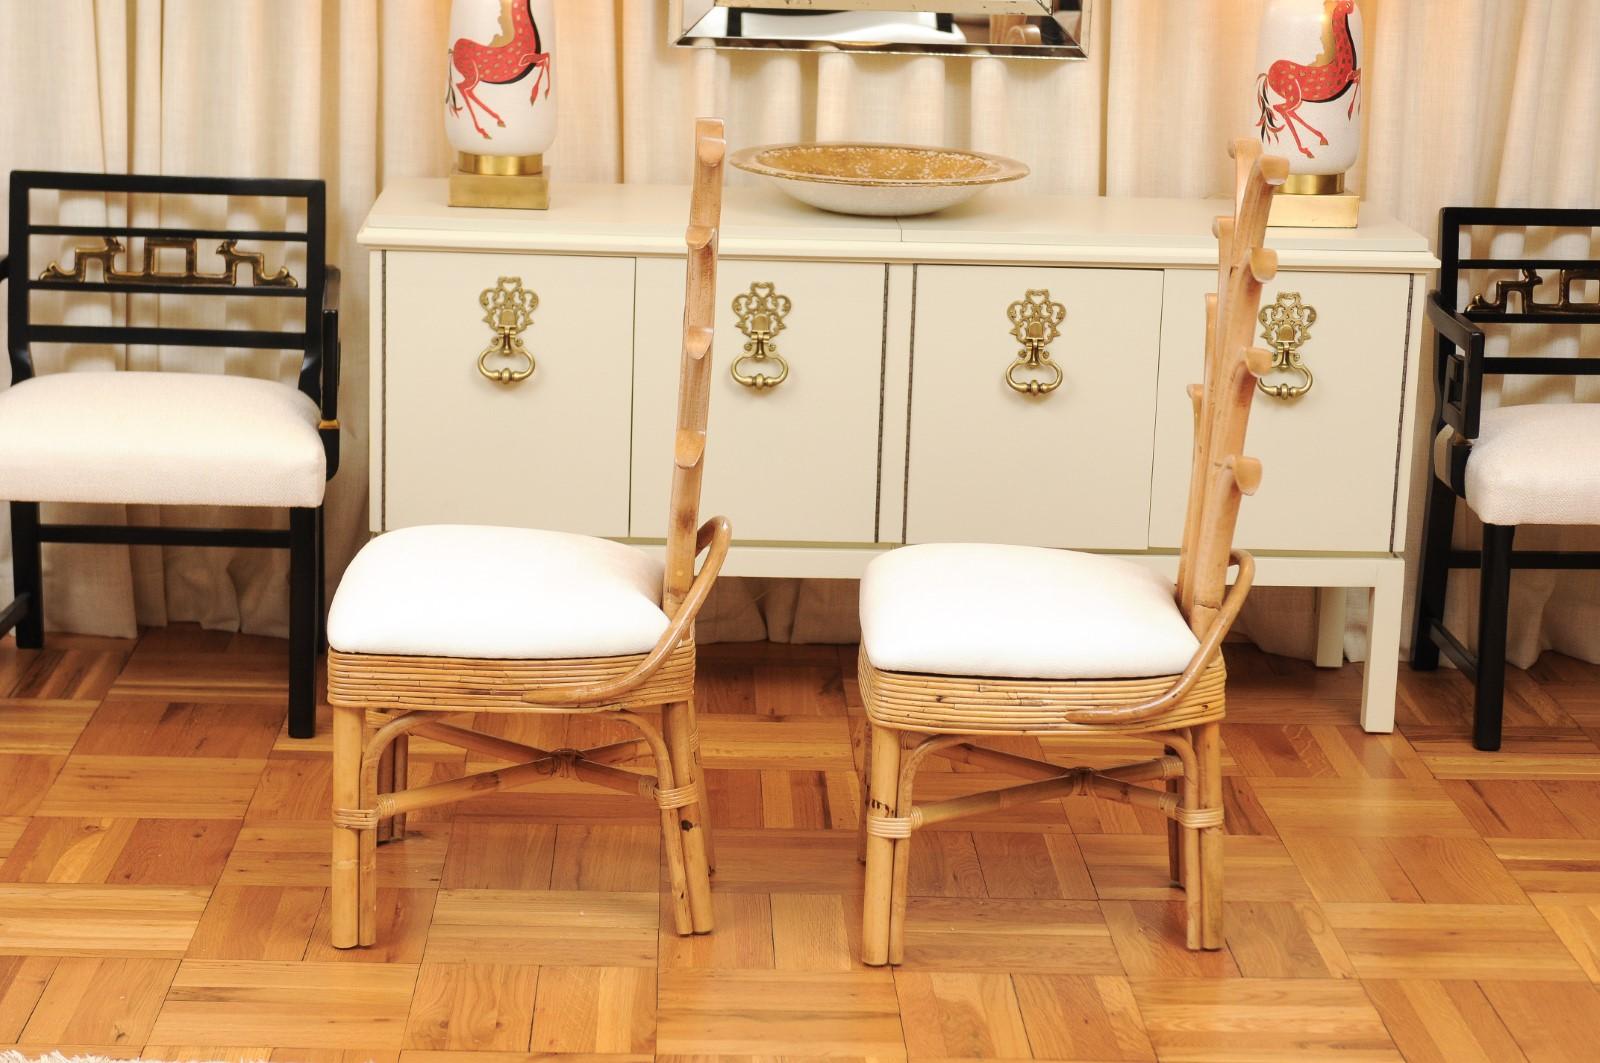 Exquisite Set of 12 Rattan and Cane Palm Frond Dining Chairs, circa 1950 For Sale 6